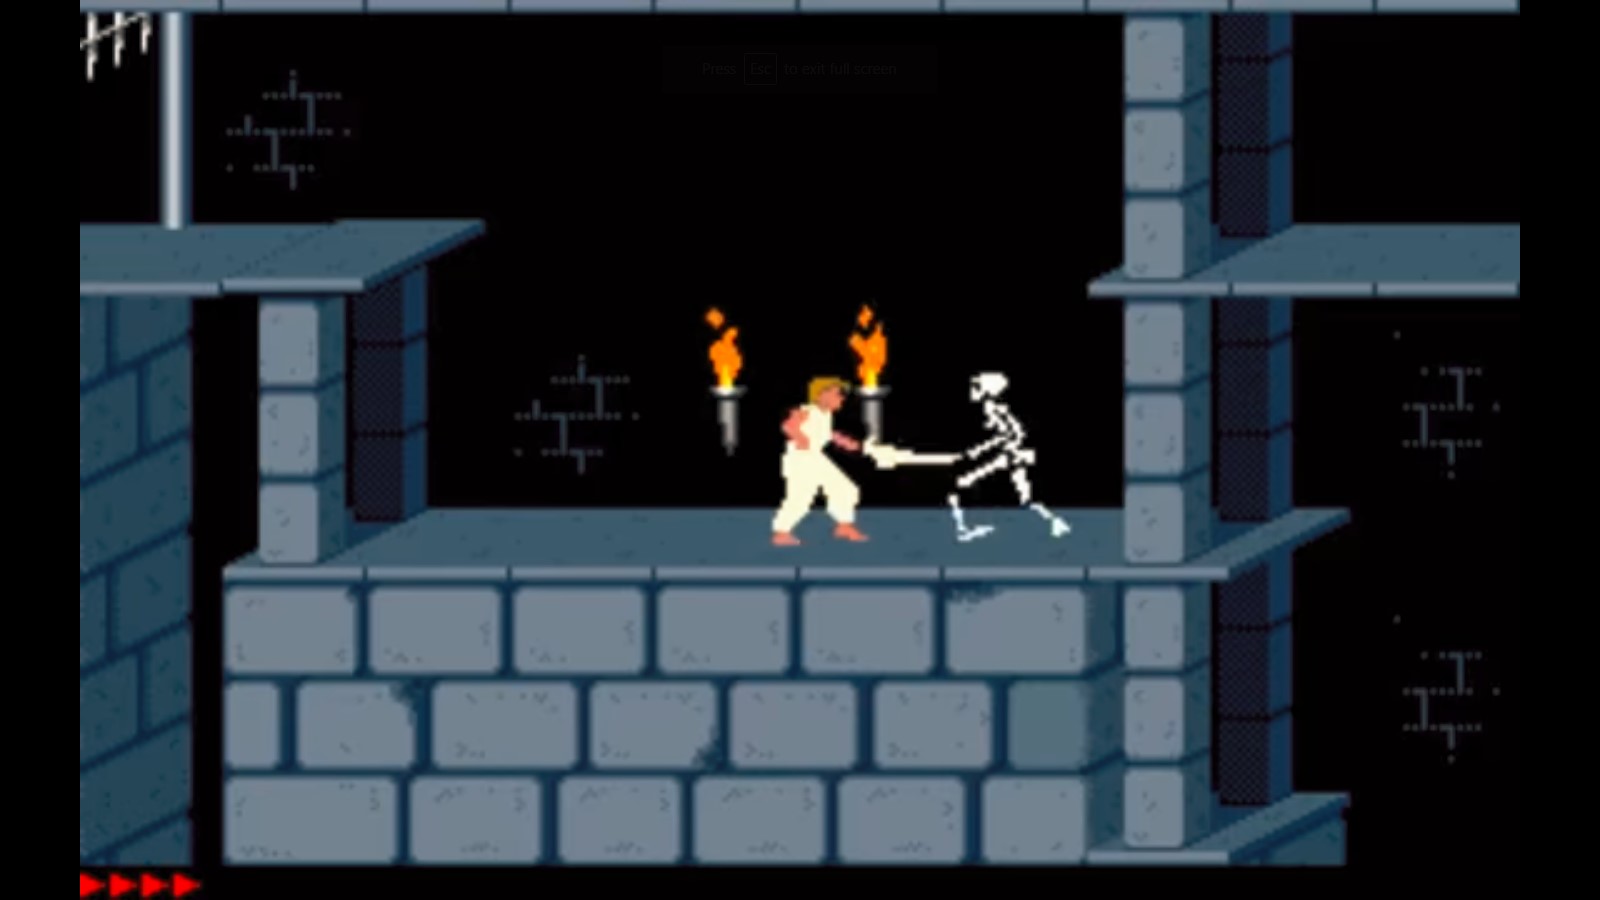 Prince of persia 1989 game download for android highly compressed